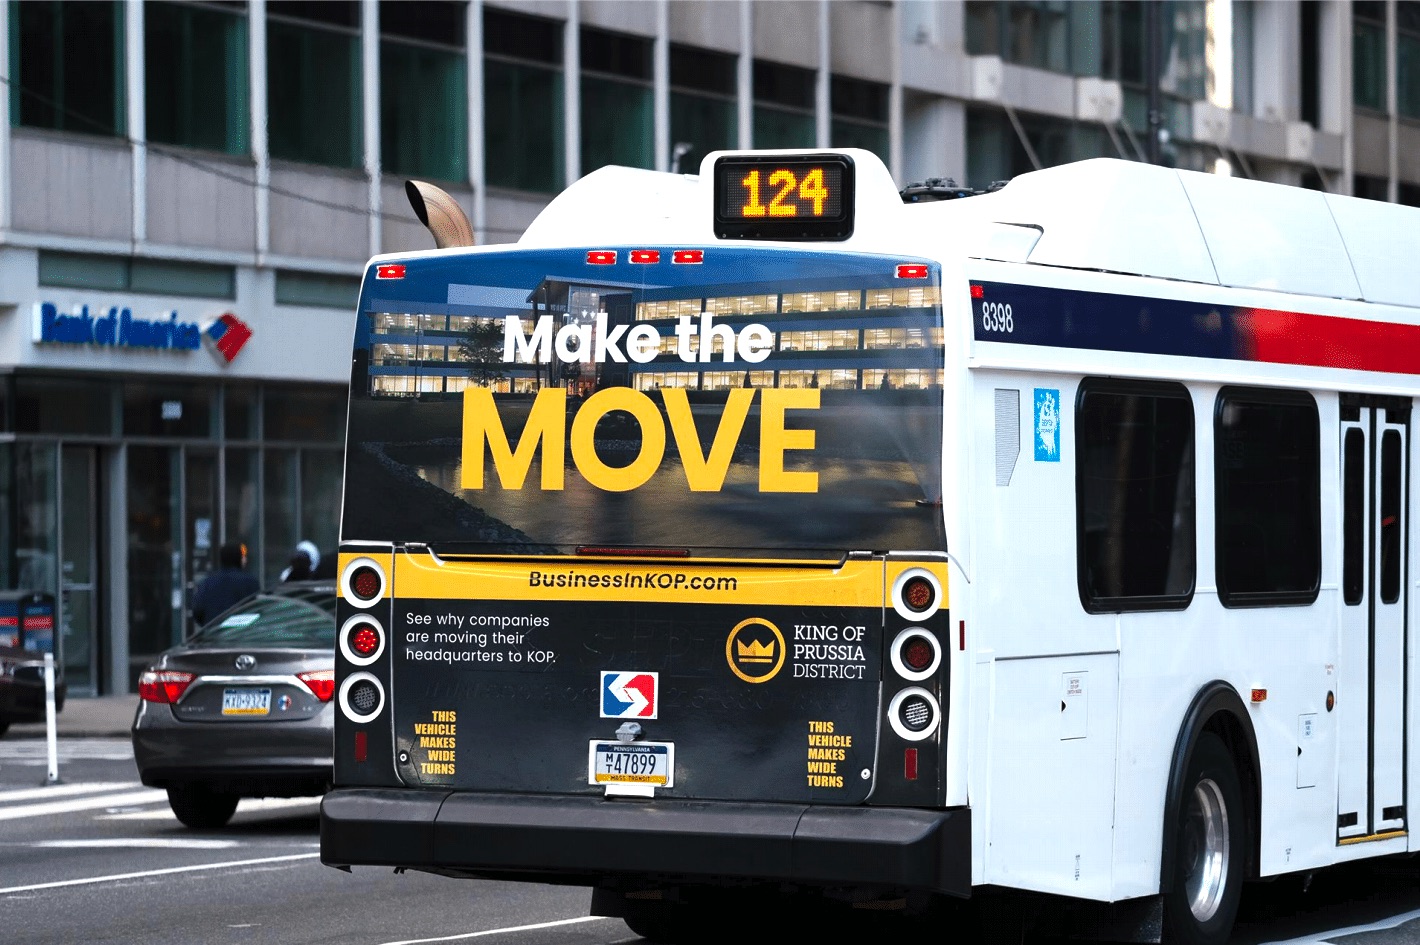 The back of a bus with an advertisement on it reading "MAKE THE MOVE"